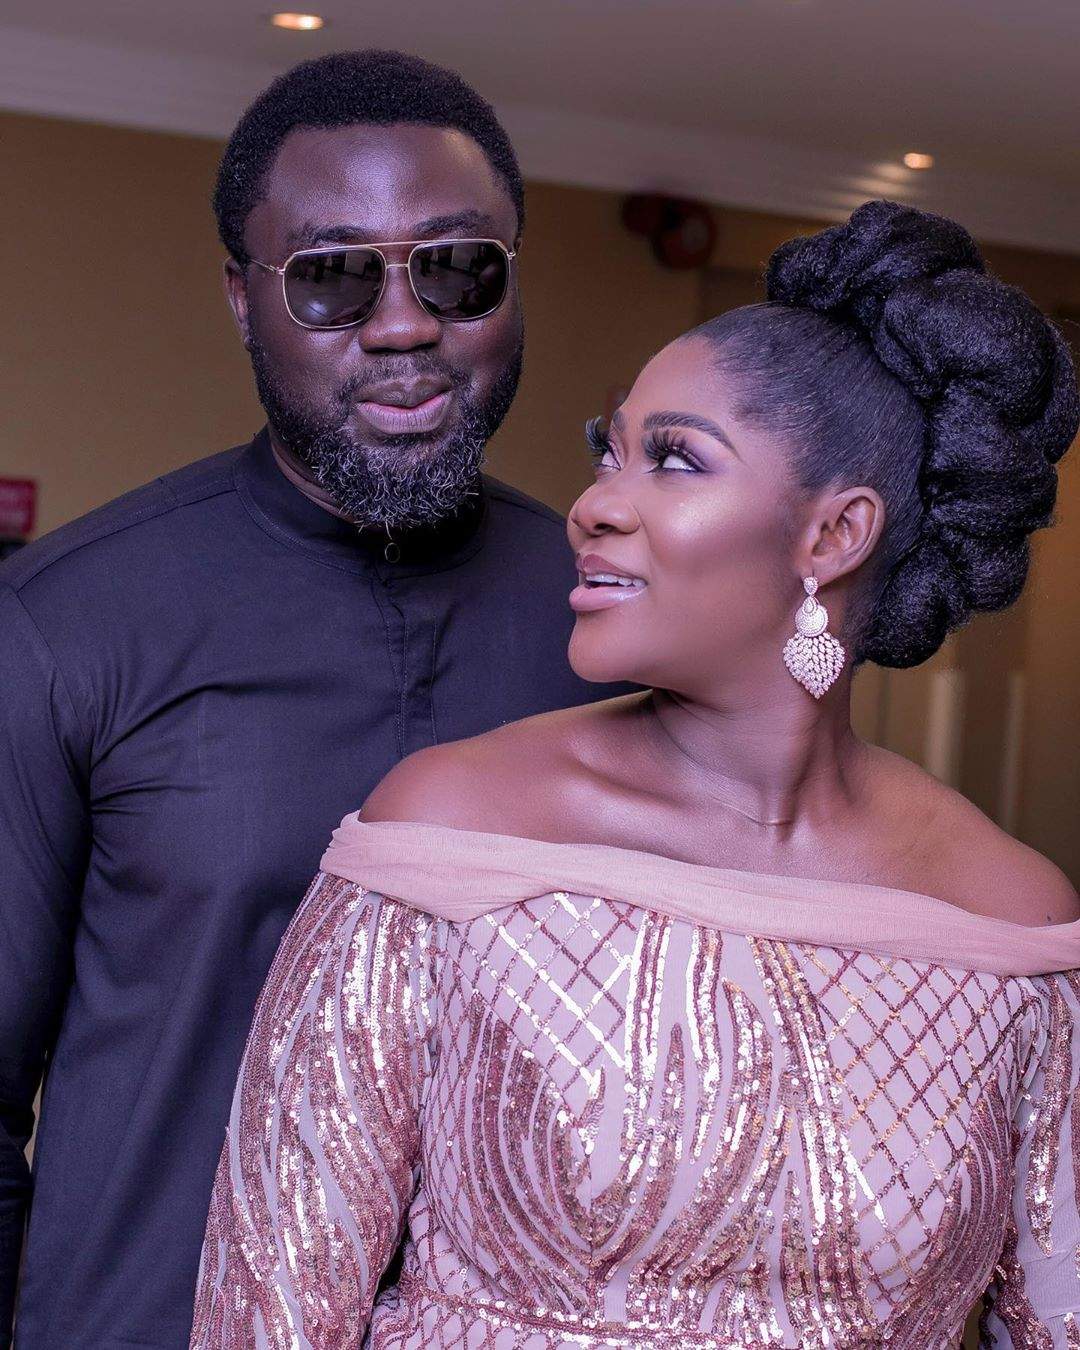 Mercy Johnson explains why she stopped acting nude, romance scenes